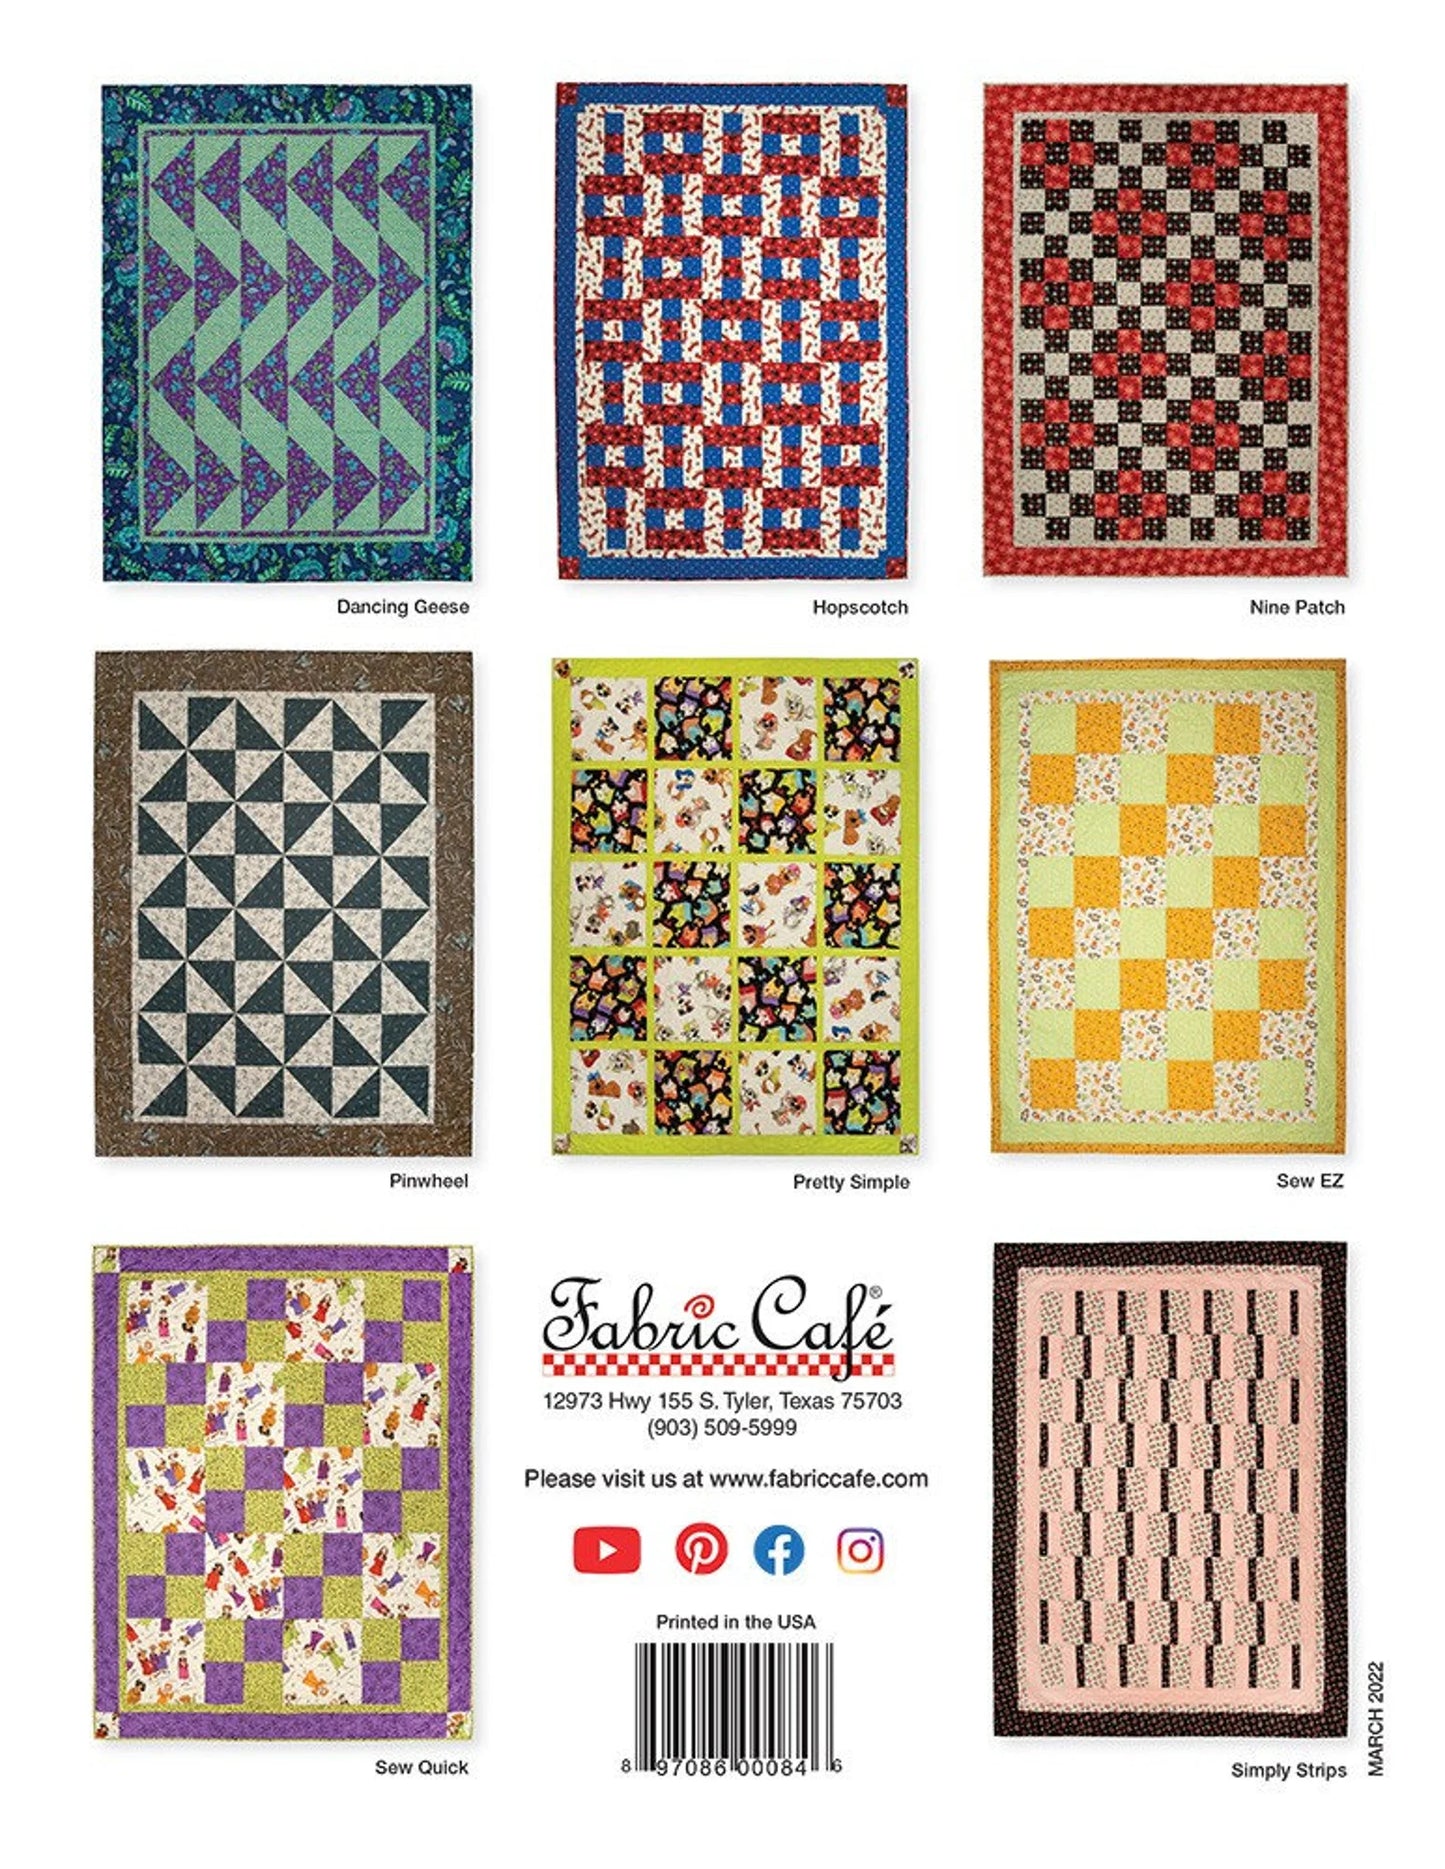 3 YARD QUILT FAVORITES 8 quilt designs DONNA ROBERTSON For FABRIC CAFE!